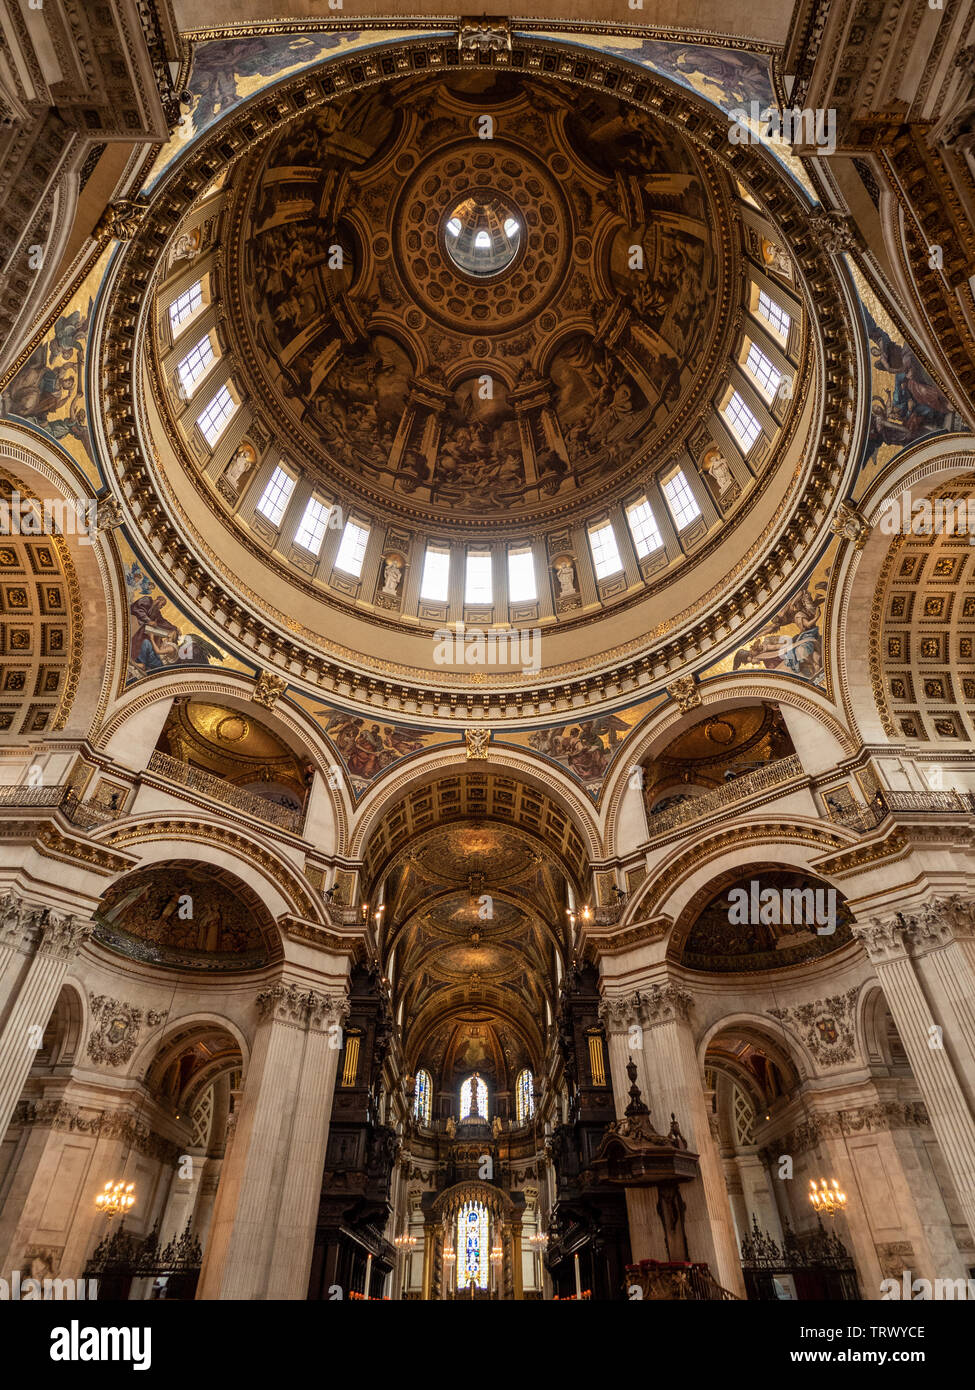 Interior of St. Pauls Cathedral, London, England. Stock Photo